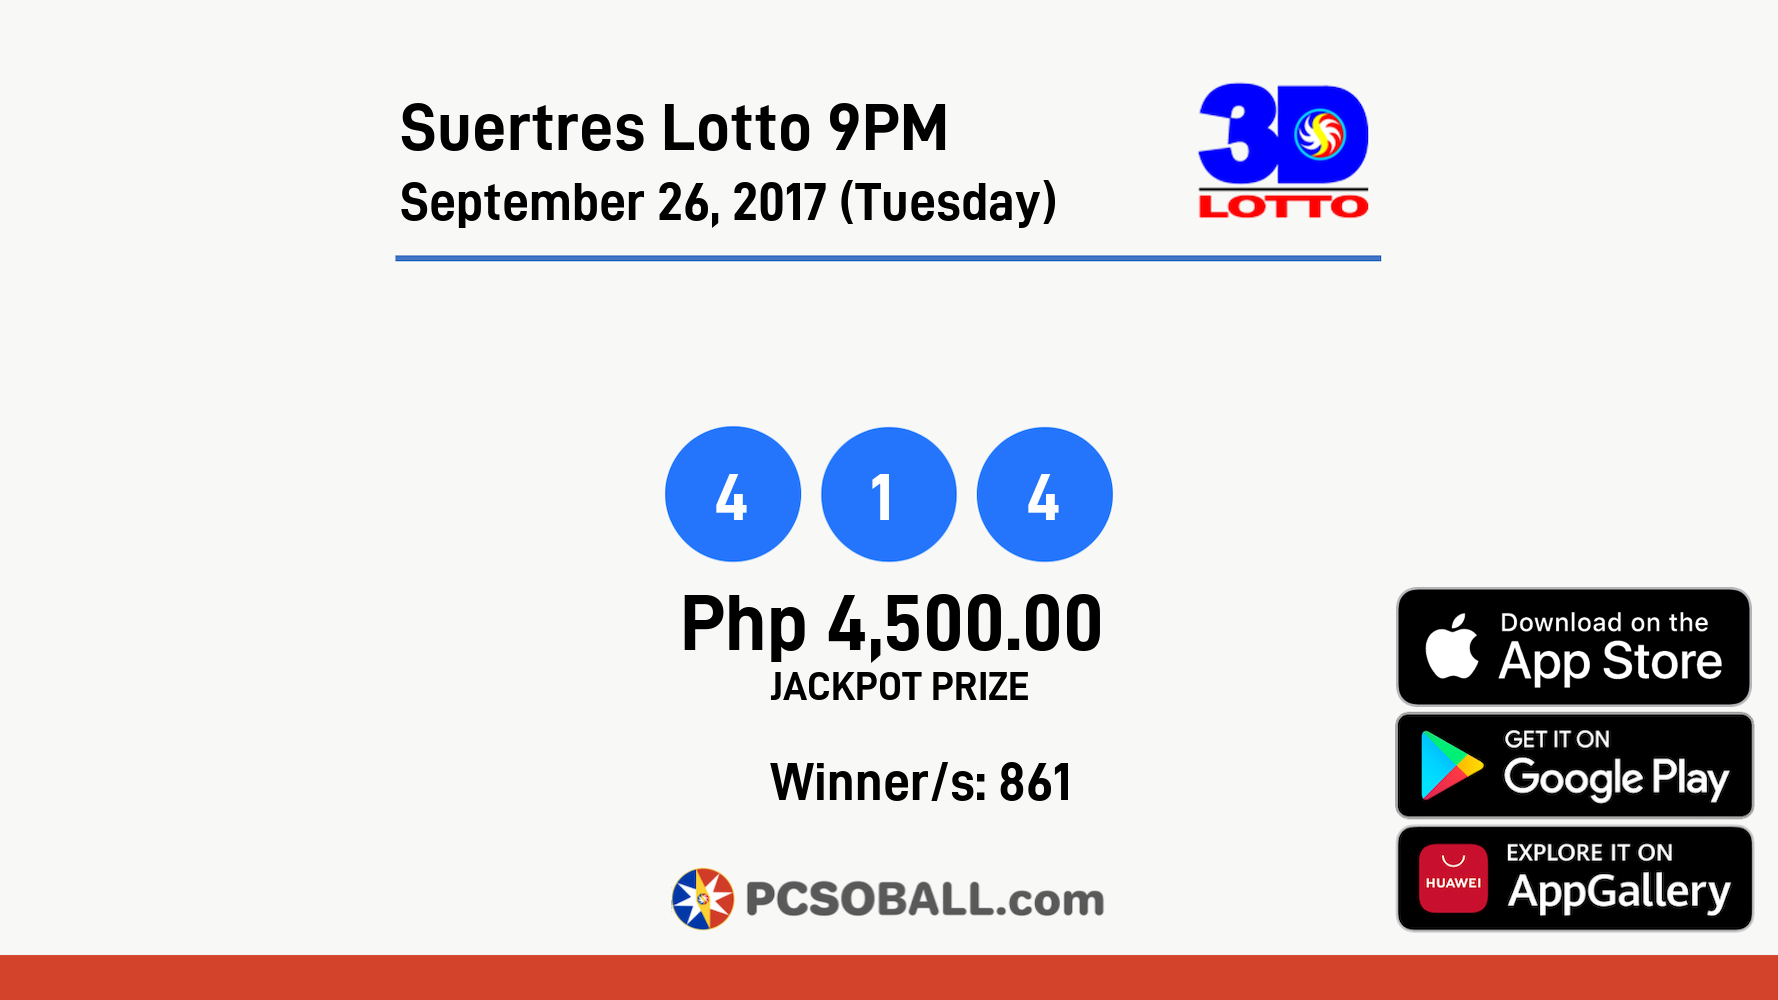 Suertres Lotto 9PM September 26, 2017 (Tuesday) Result